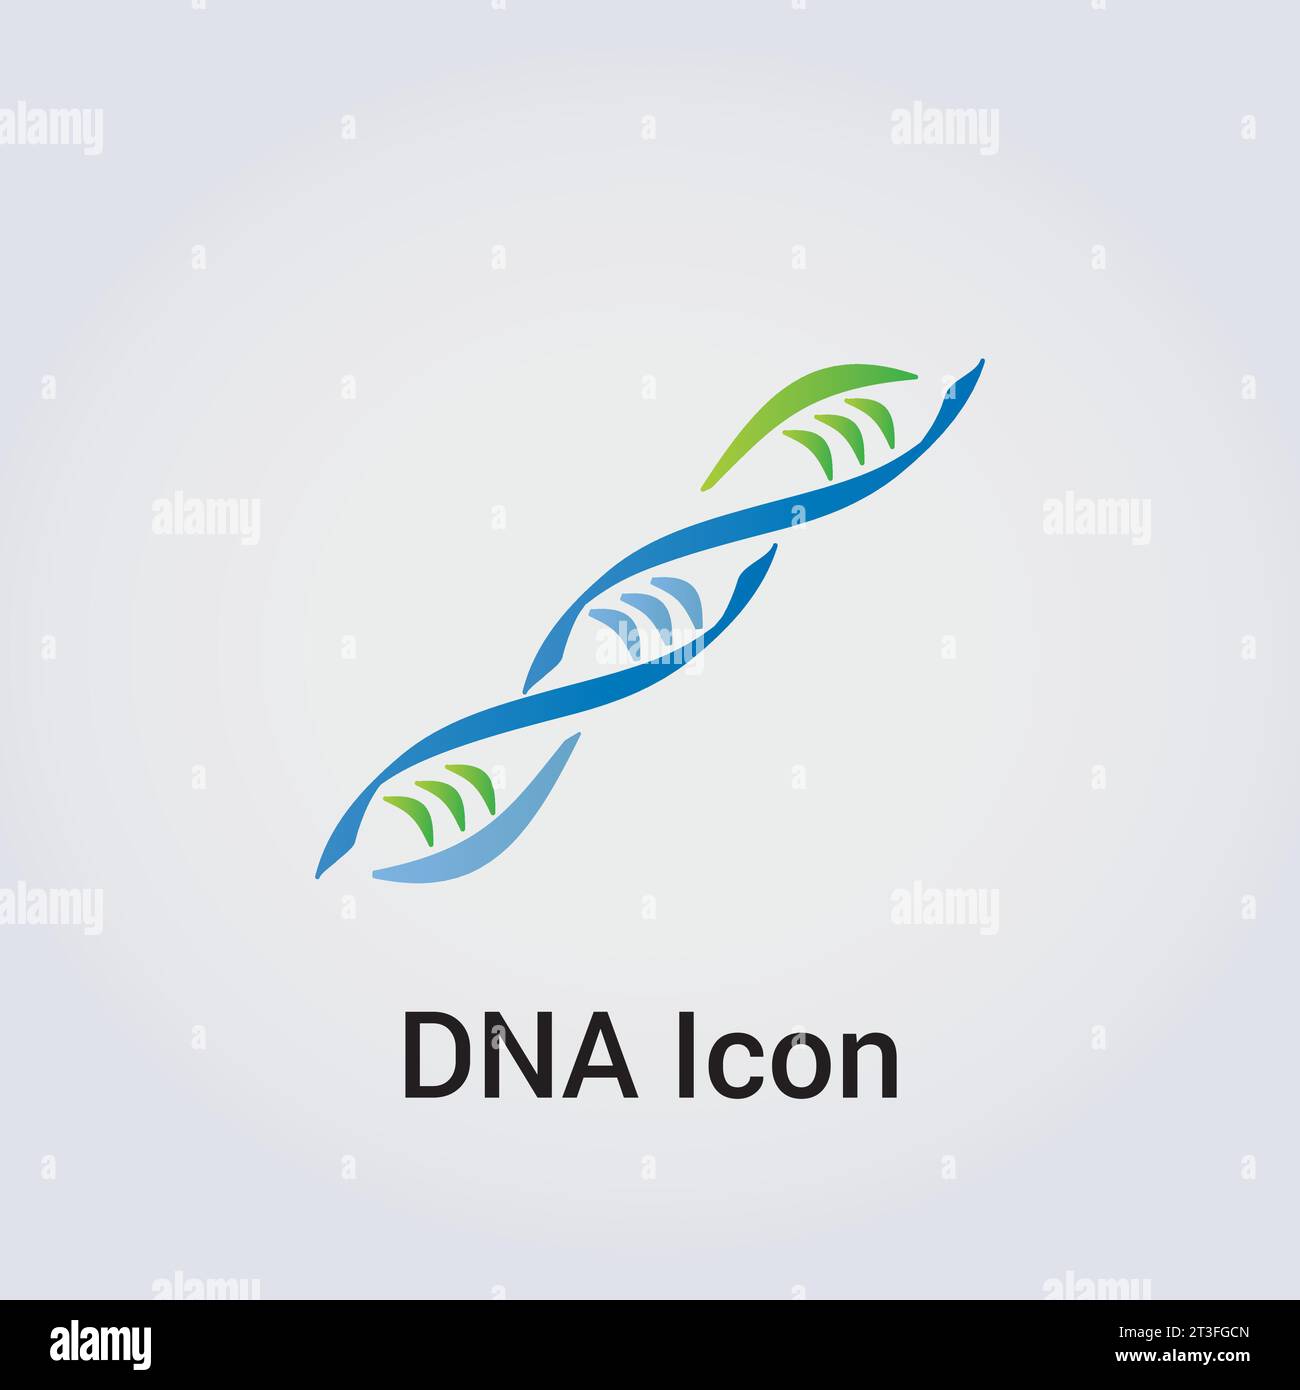 DNA Icon Logo Symbol - Gene Genetics Research Medical Science Human Health Emblem - Helix Pattern Strand Chain Infinity Concept Vector Stock Vector